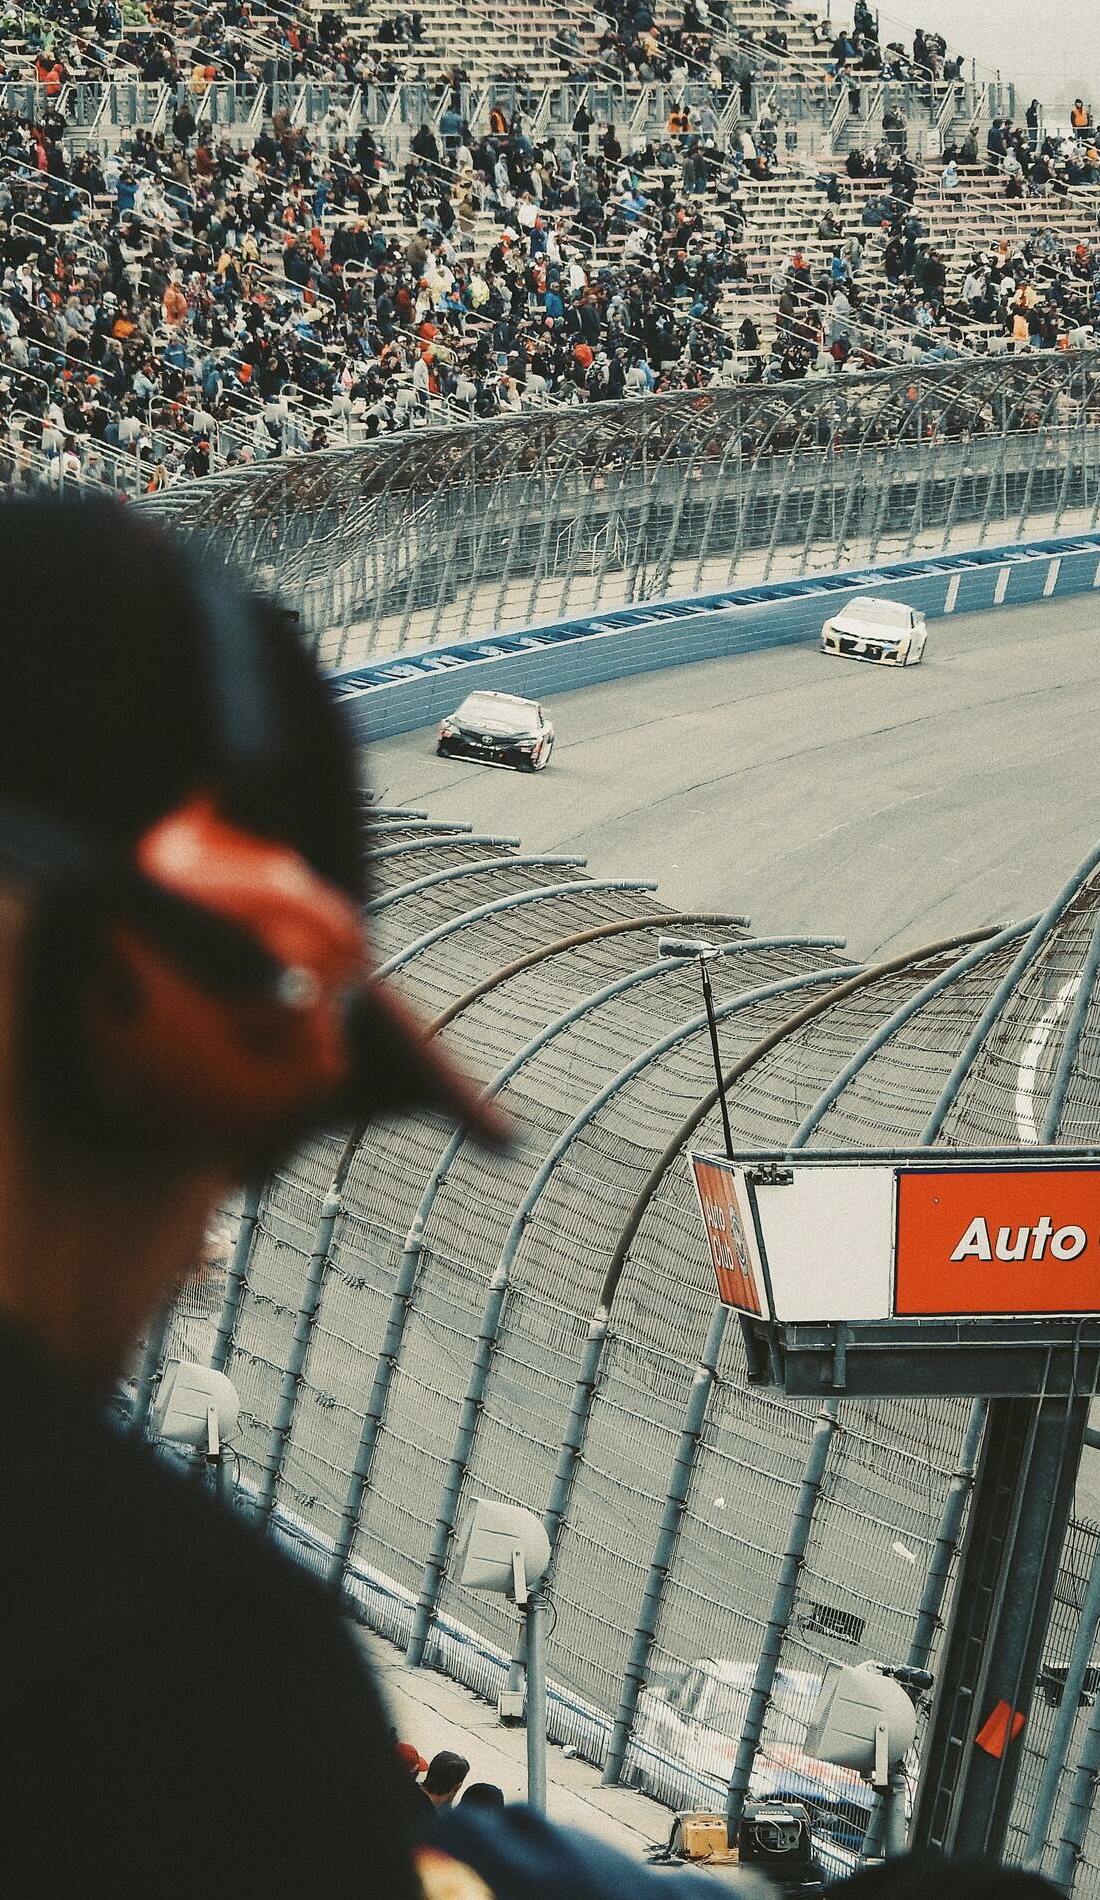 A Ford Ecoboost 200 live event